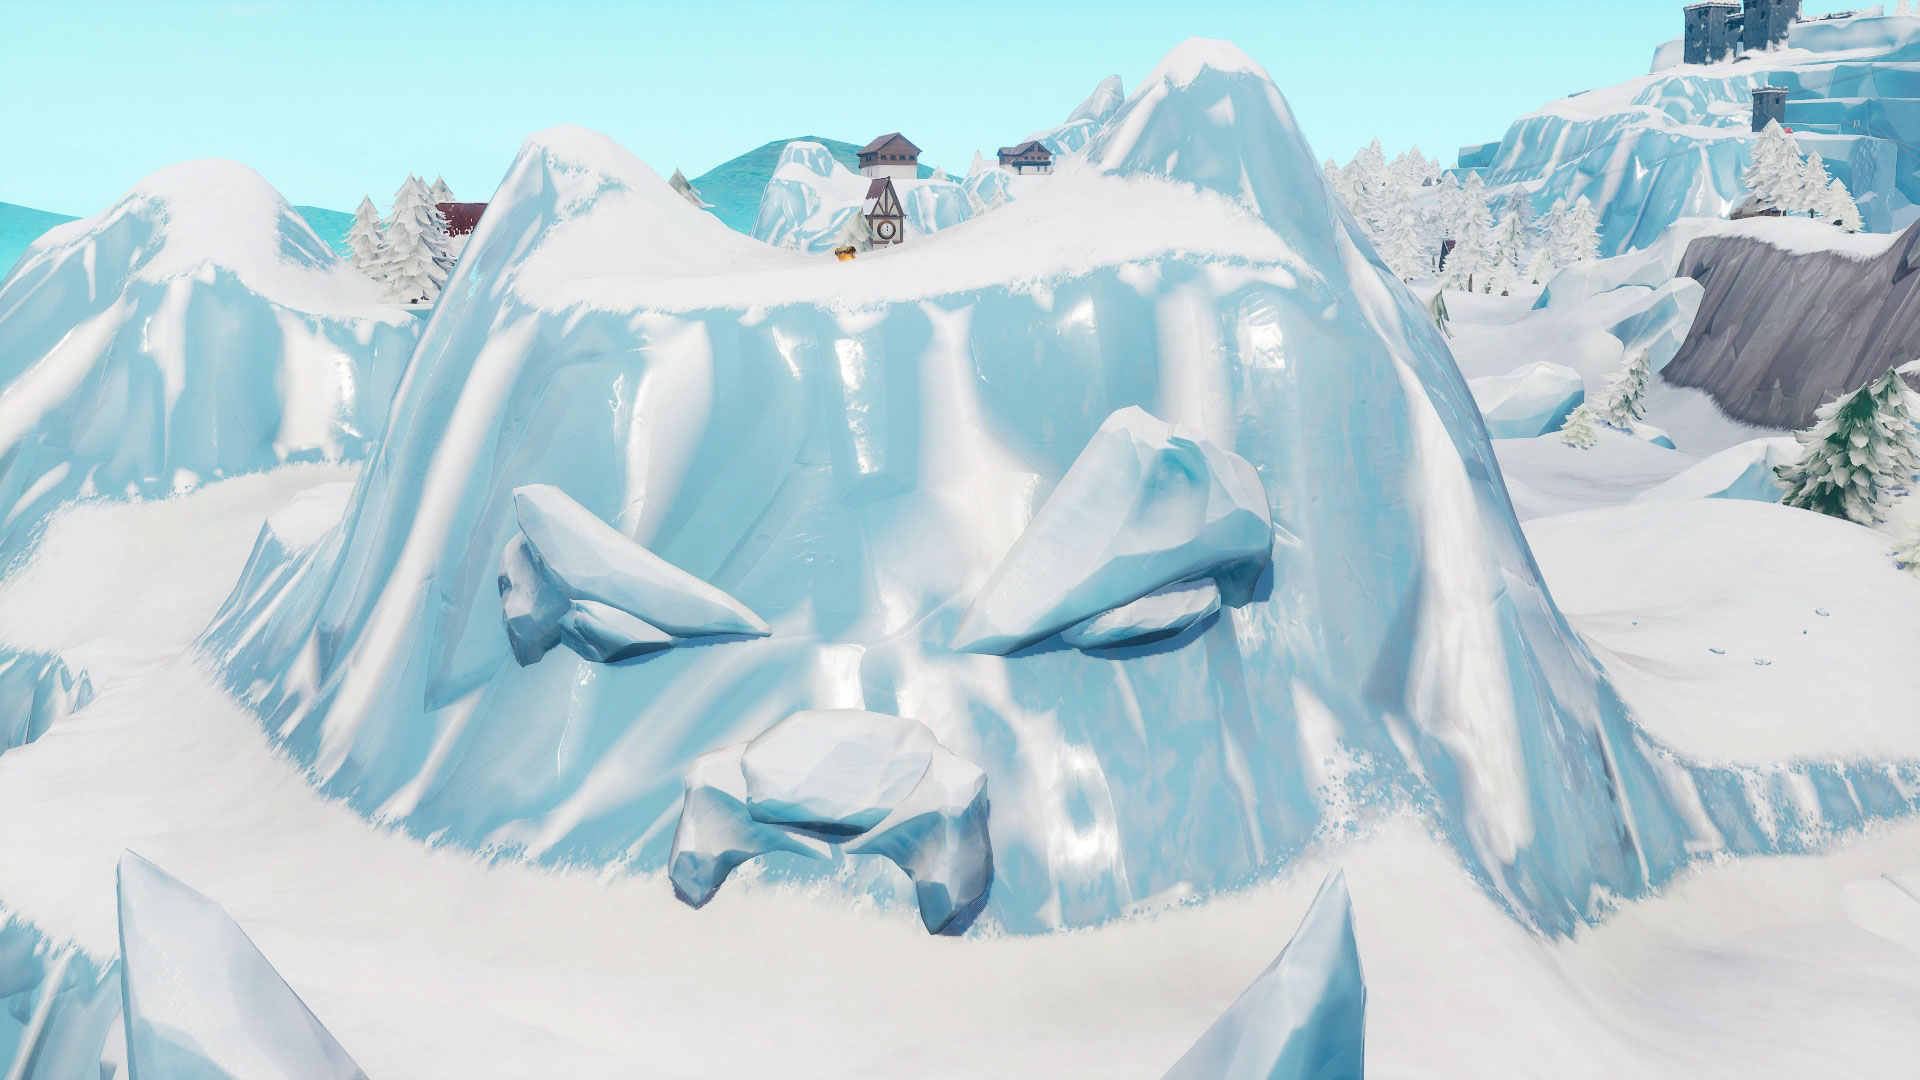 where to visit a giant face in the desert the jungle and the snow in fortnite season 8 week 1 challenge gamesradar - three ice sculpture fortnite location